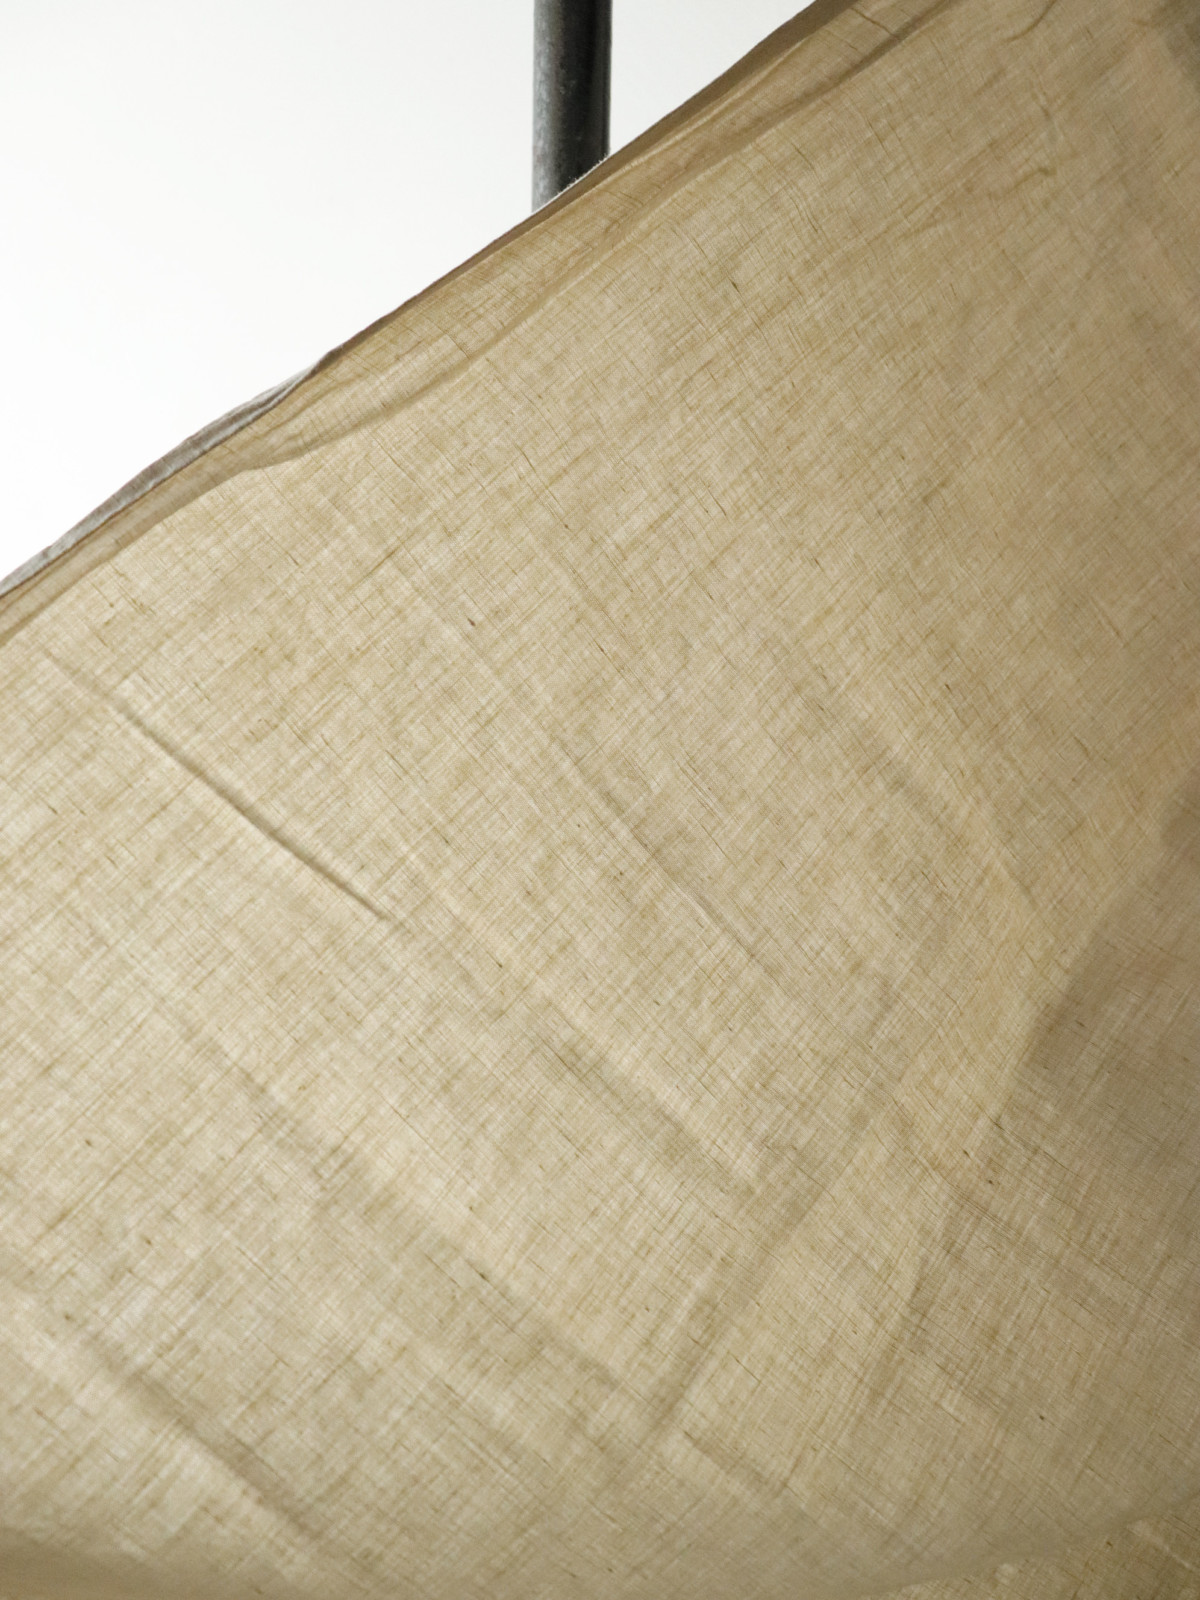 Early1900’s, french linen, dyed linen fabric,